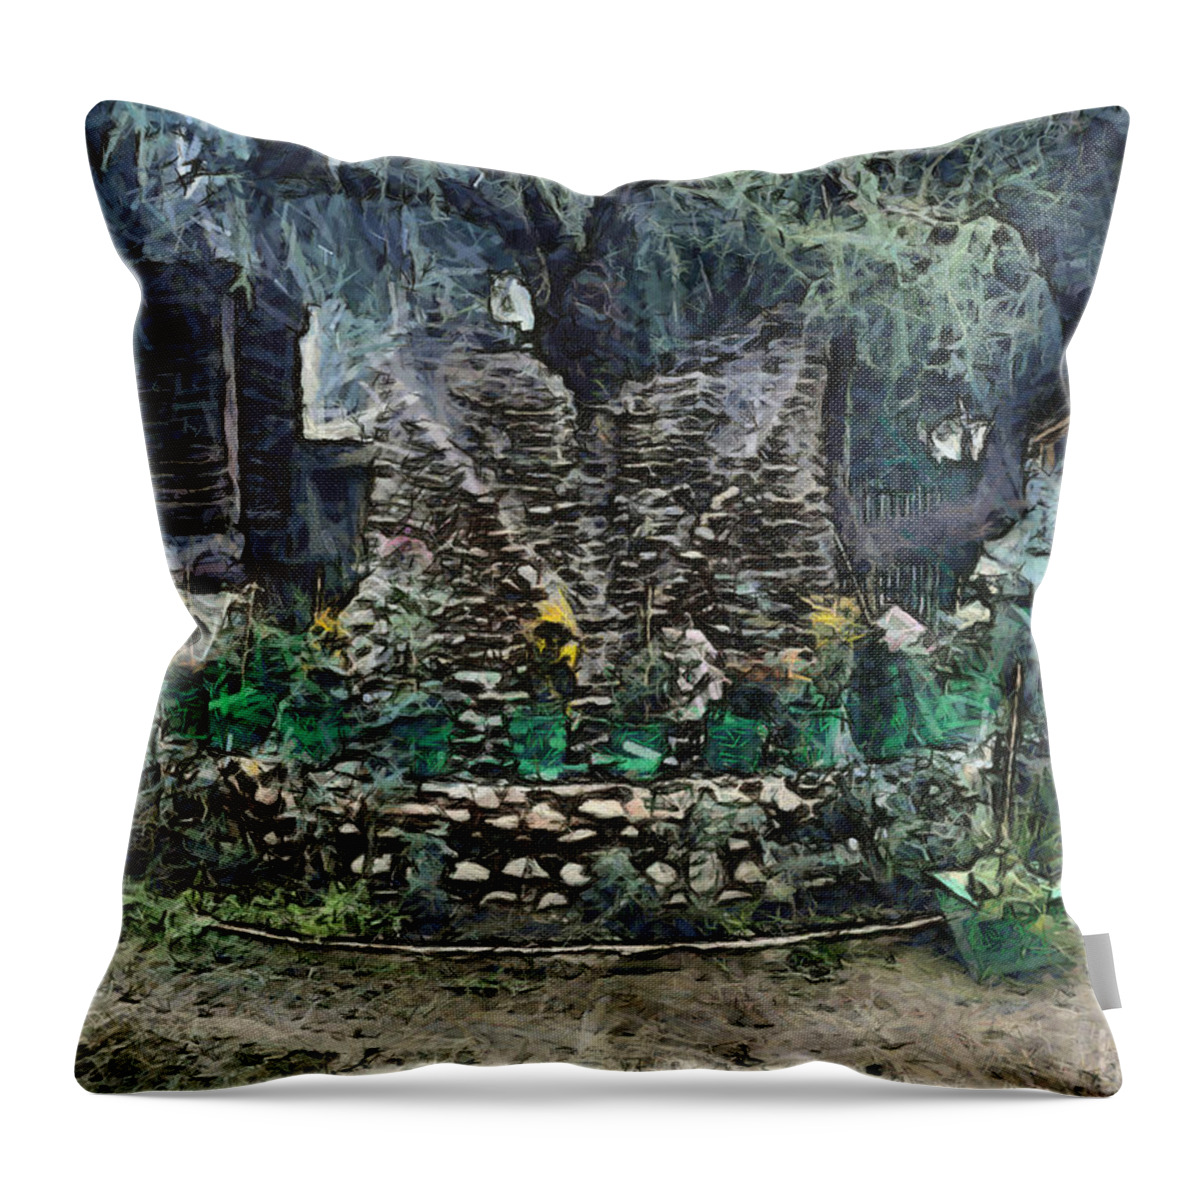 Stone Decoration Throw Pillow featuring the photograph Stones to decorate a tree by Ashish Agarwal